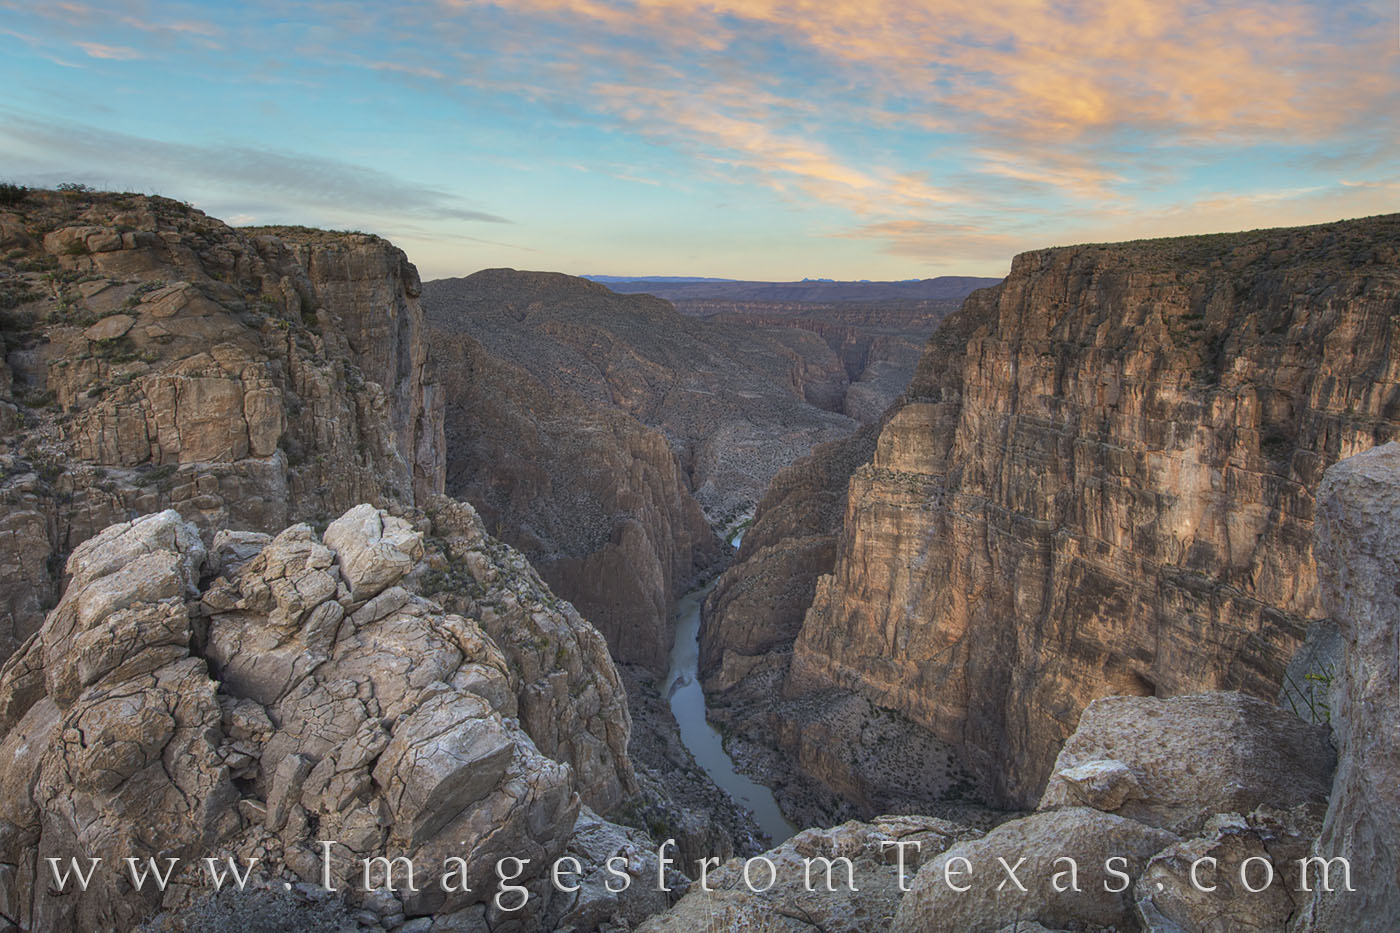 It took 5 hours to arrive at this amazing overlook deep a remote region of Big Bend National Park - a 2+ hour drive across to...